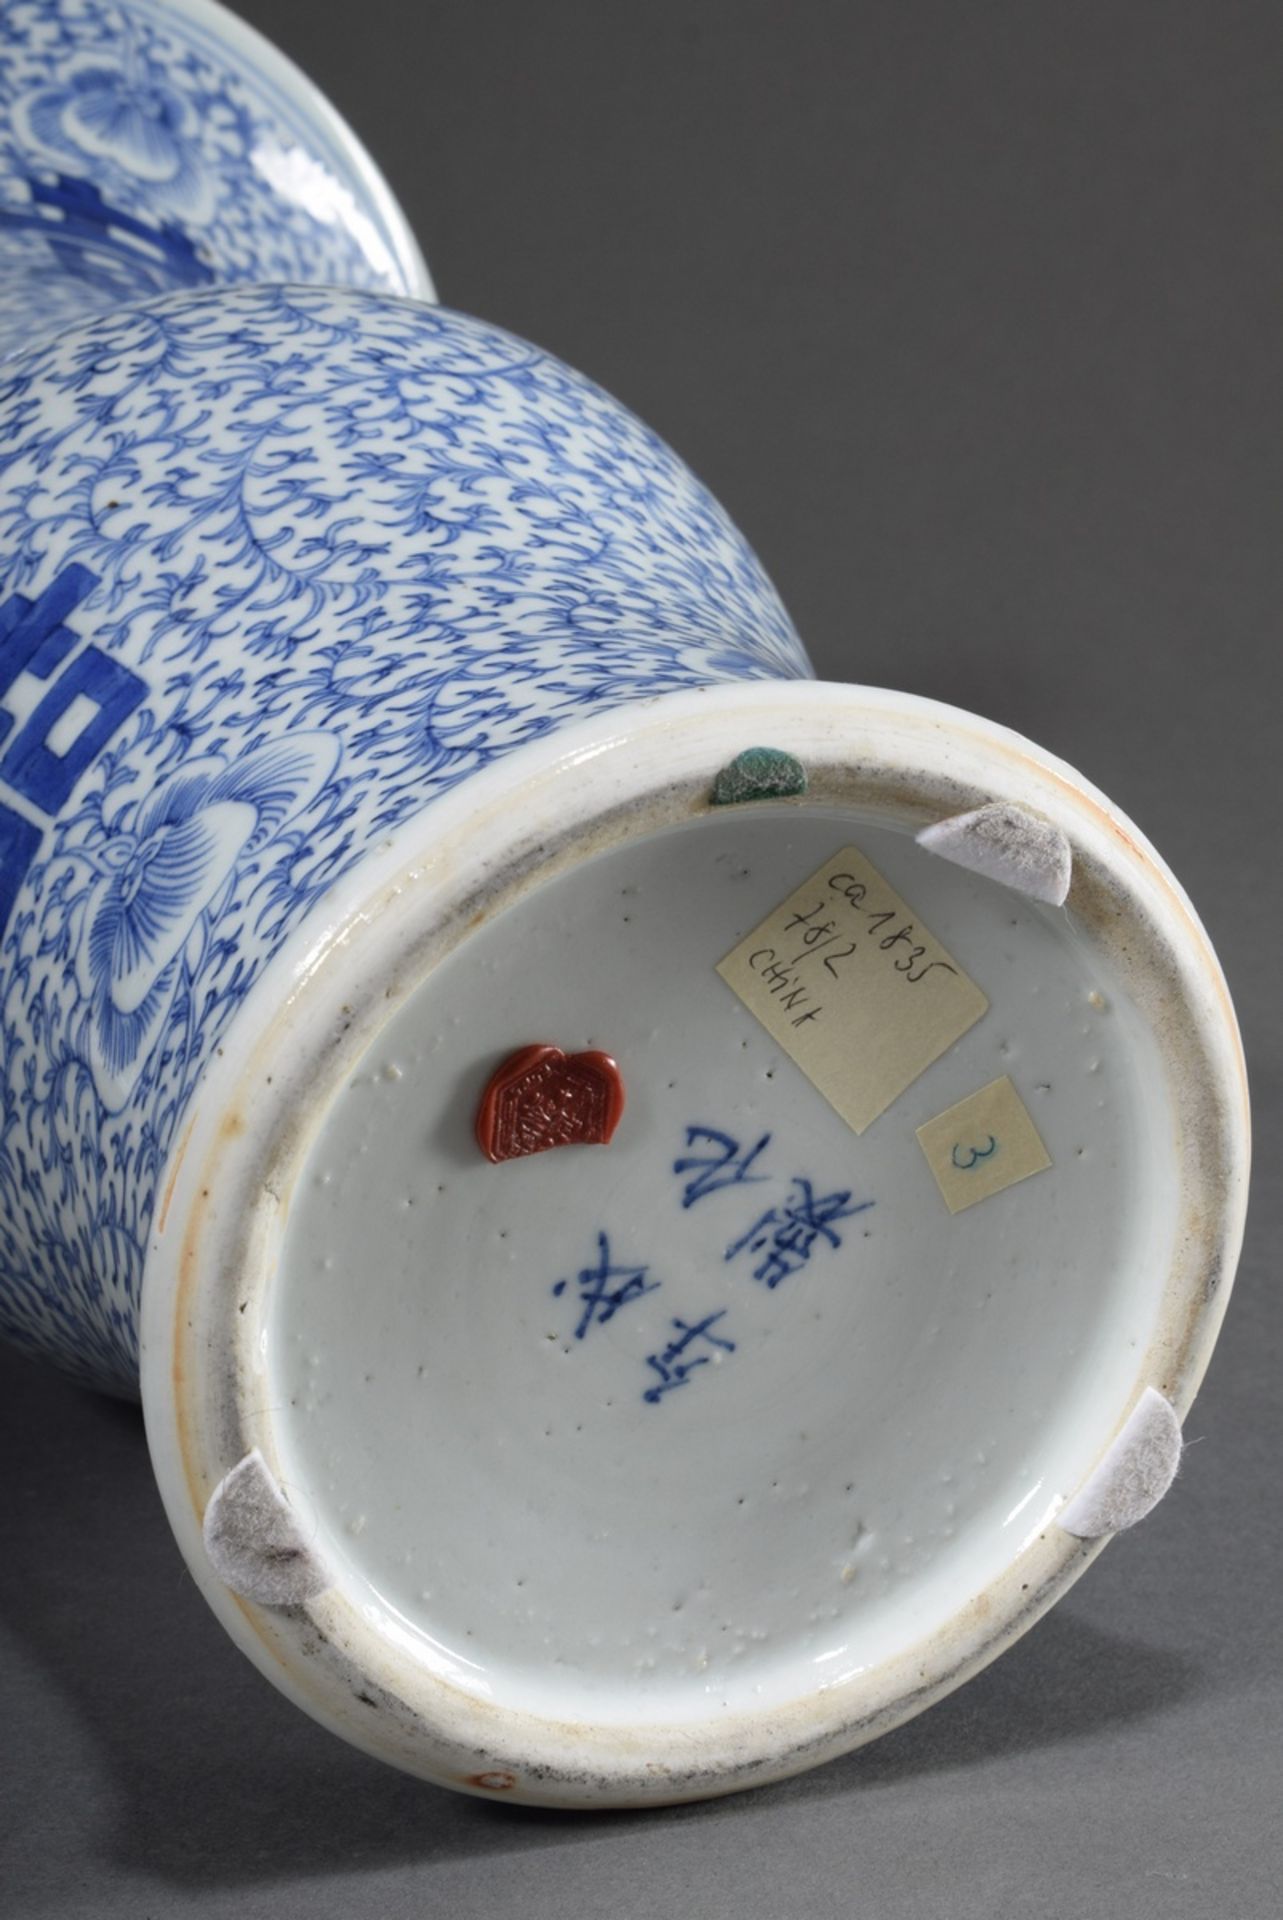 Chinese porcelain "Gu" vase with blue painting "lucky sign" on floral background, h. 41cm, Ø 24cm - Image 5 of 6